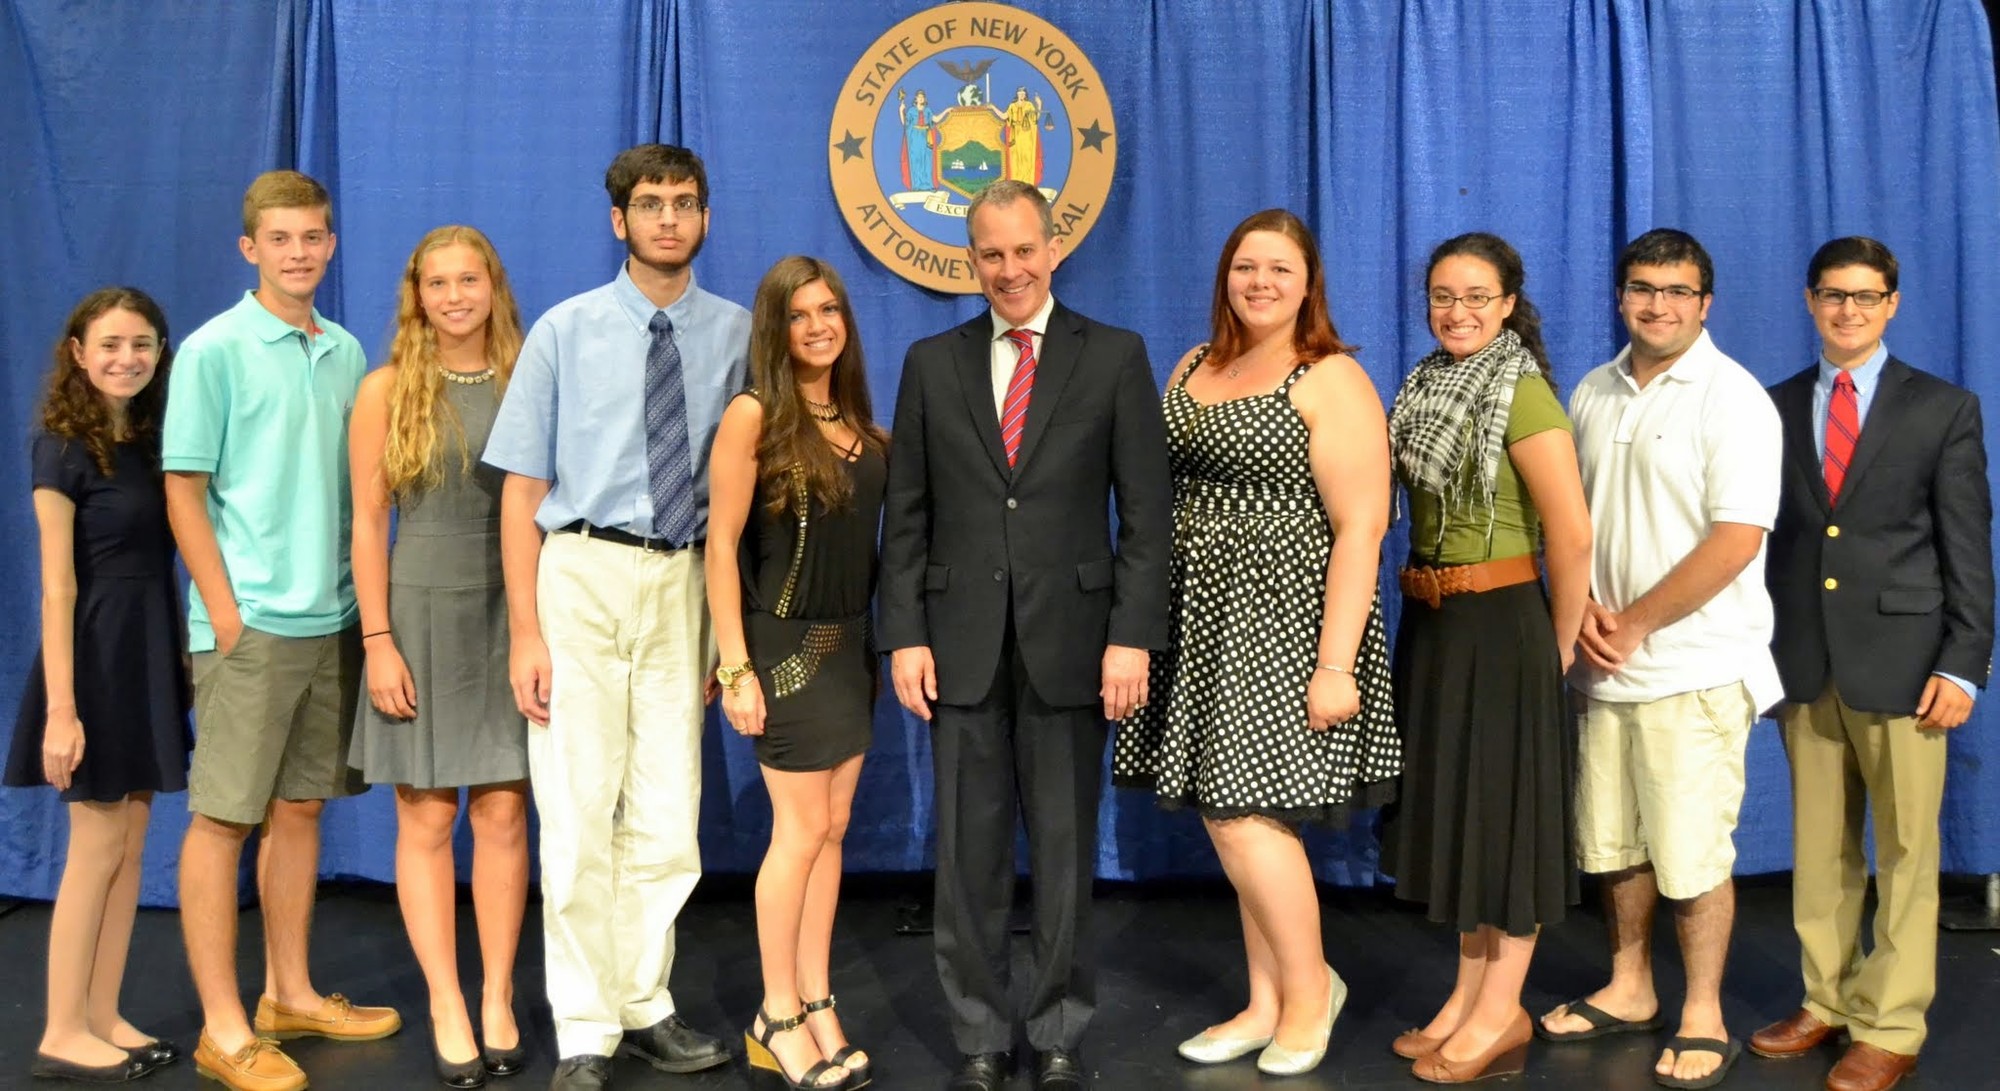 Lindsey Fowler, pictured to the left of New York State Attorney General Eric Schneiderman, was Mepham High School’s Triple C Award winner in 2014.